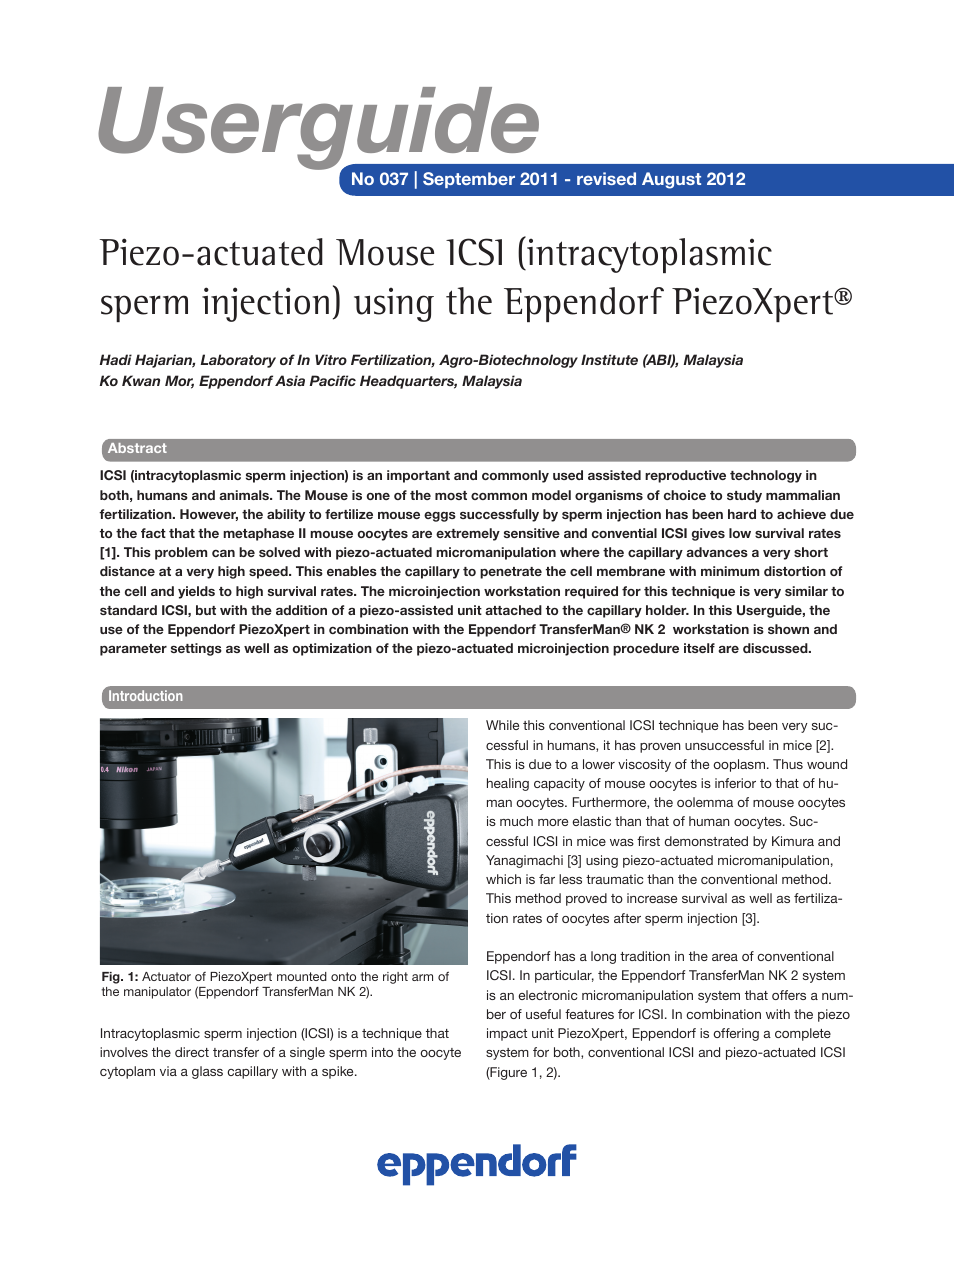 Piezo-actuated Mouse ICSI (intracytoplasmic sperm injection)